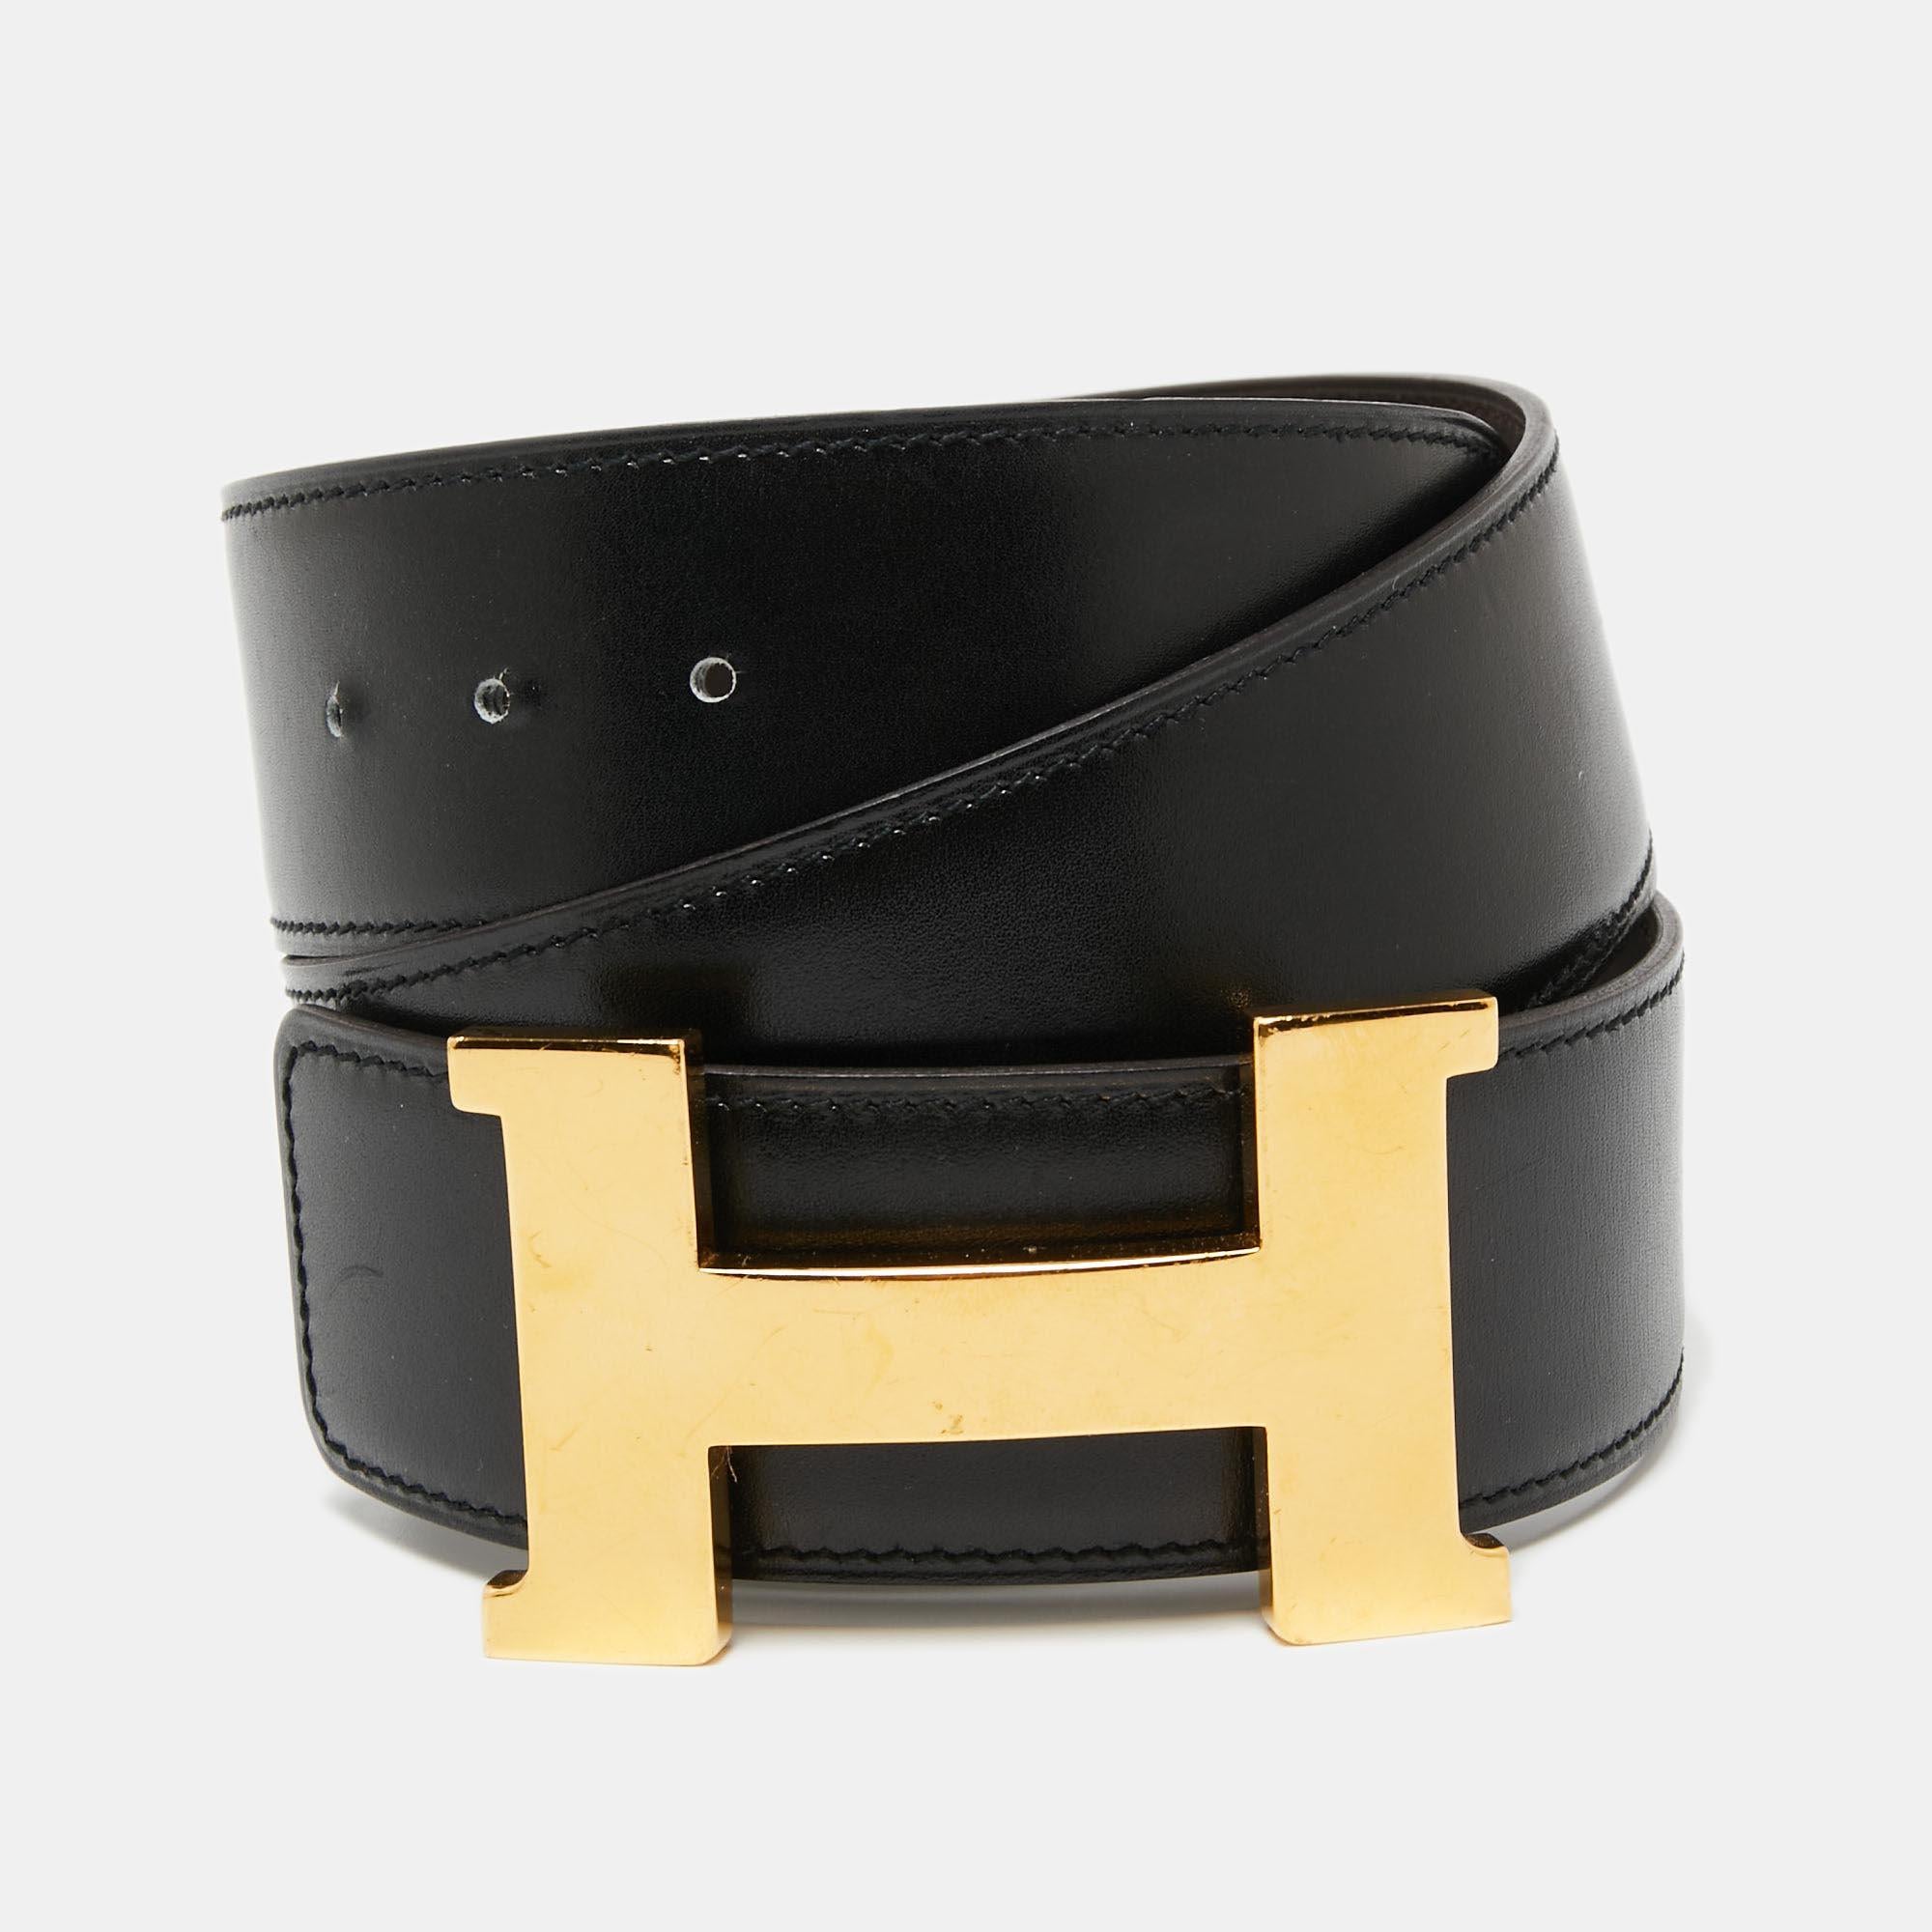 Coming from the House of Hermes, this belt will certainly grant signature beauty and luxury to your accessory repertoire. It is crafted from black-Chocolat Box and Swift leather, with a gold-tone H buckle perched on the front. This sturdy belt